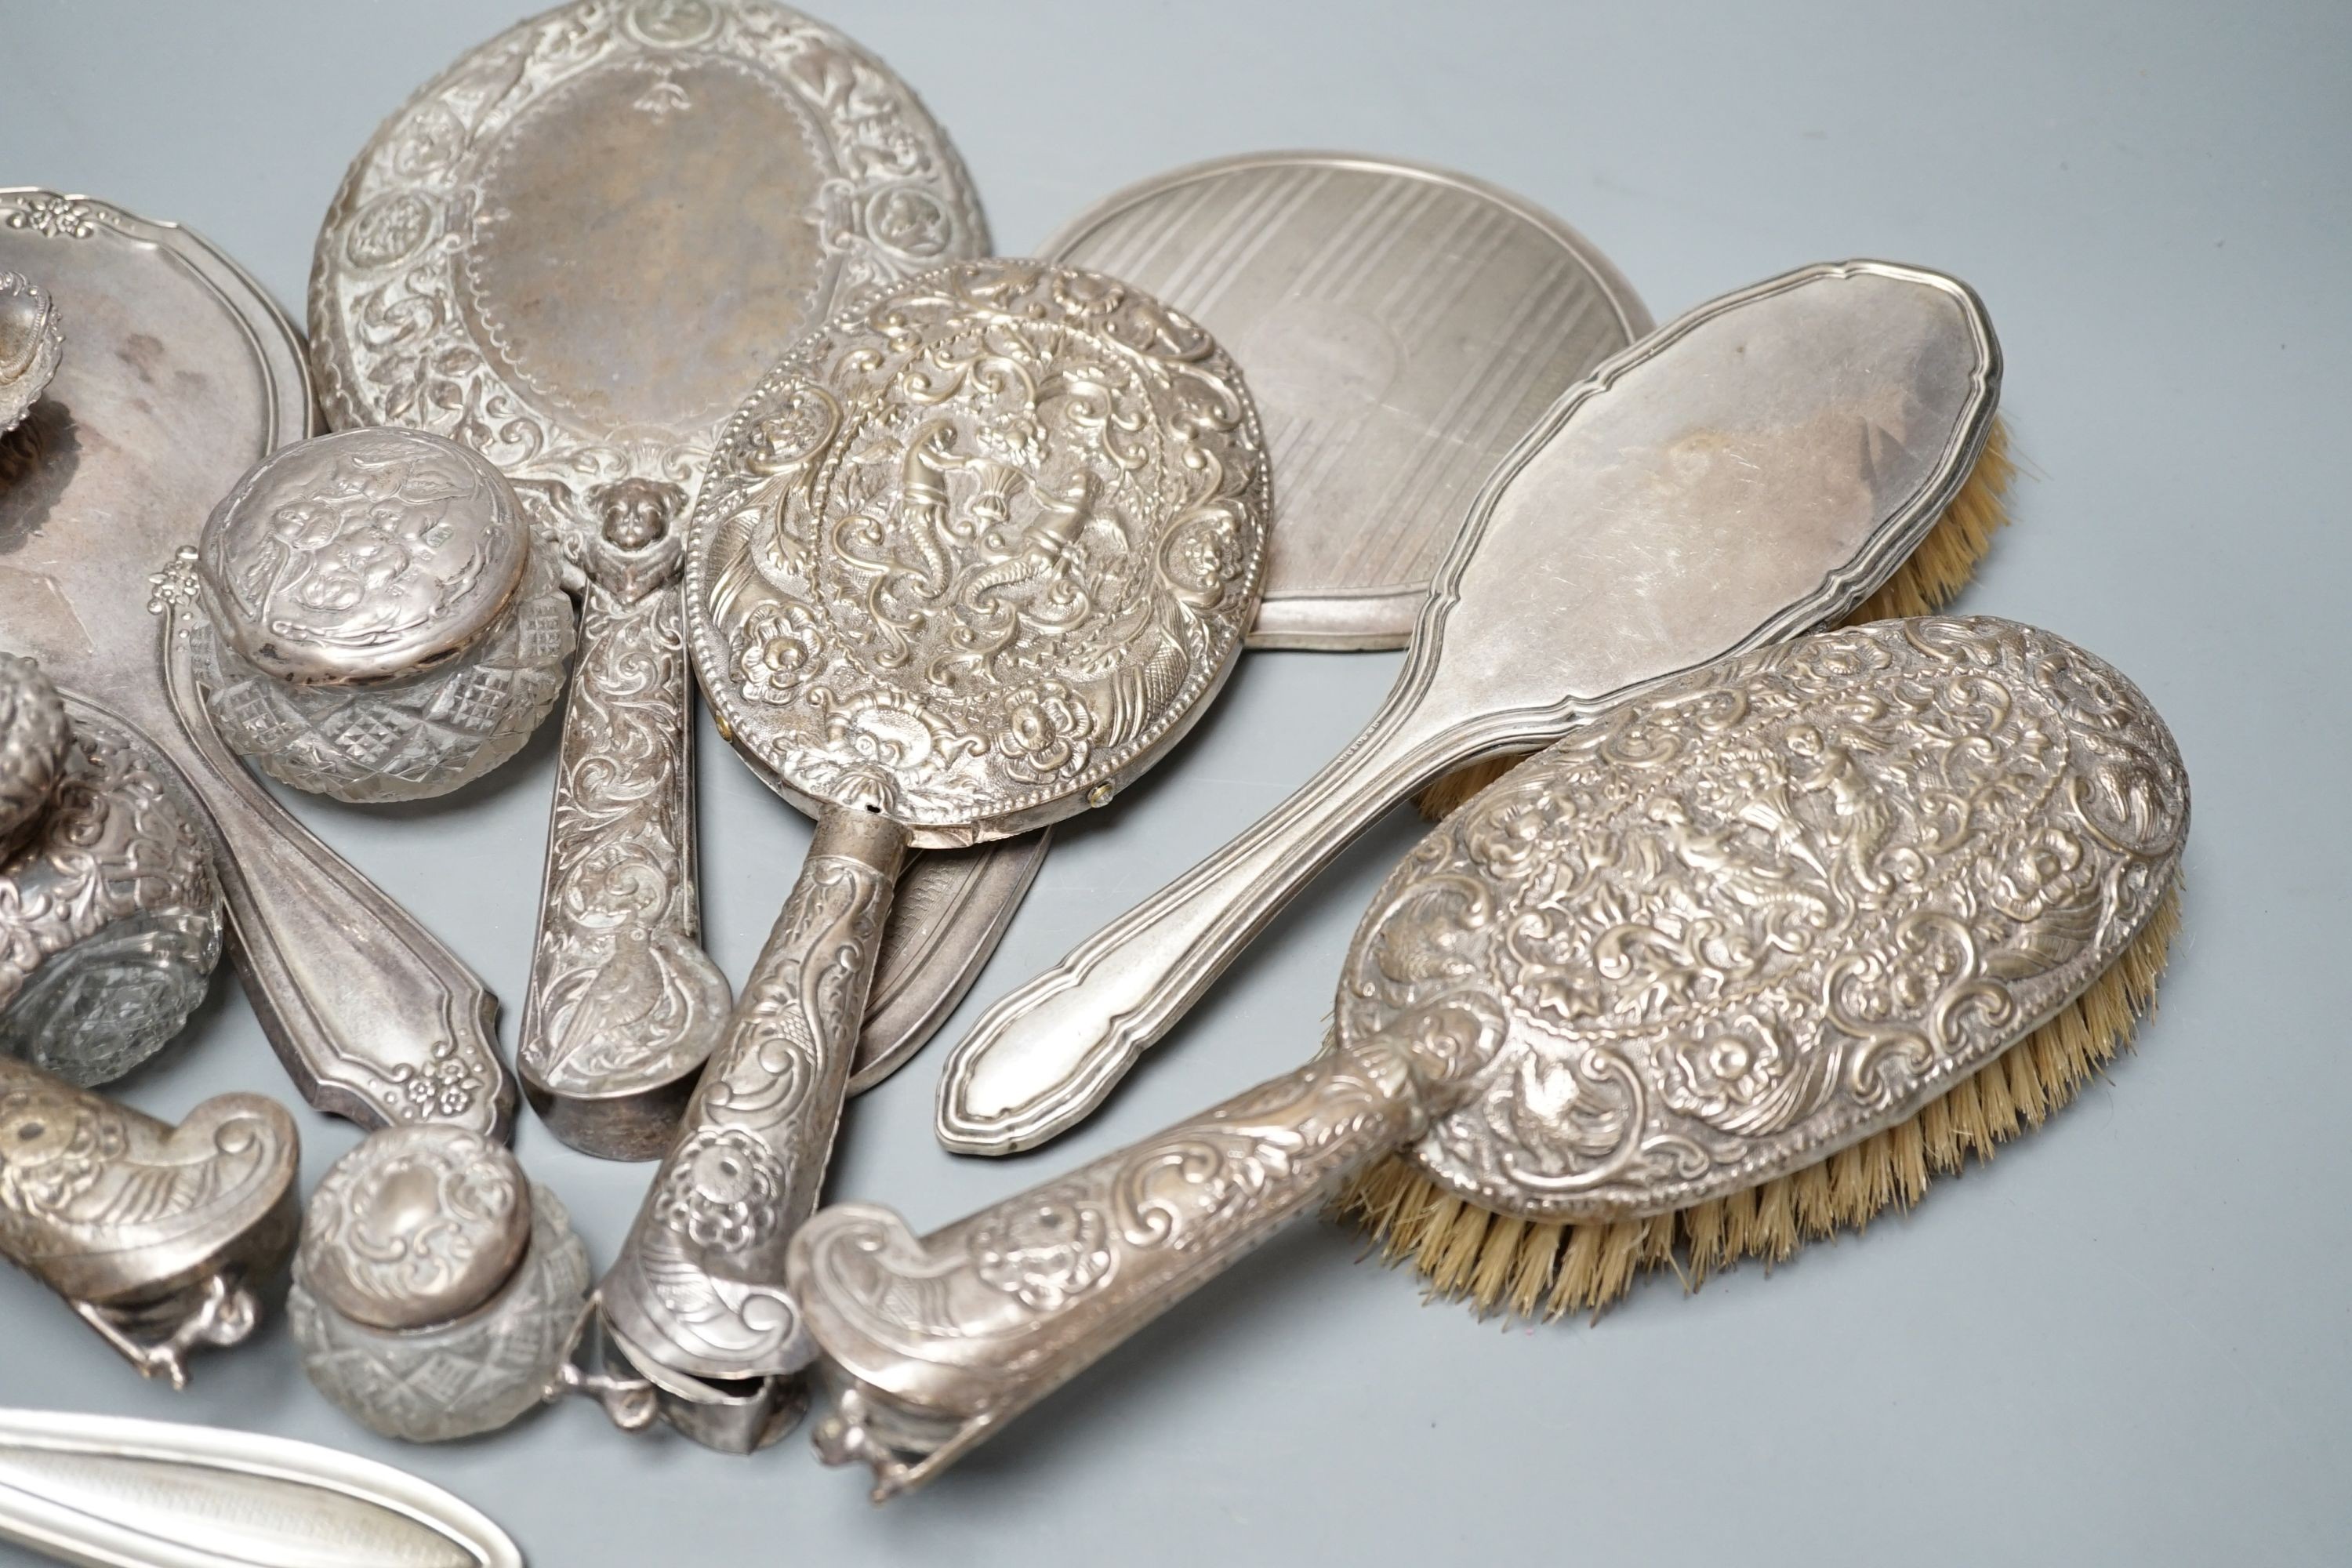 A mixed collection of four silver mounted vanity mirrors, four assorted clothes brushes, (including set of three), three silver mounted glass jars and a small silver dish.